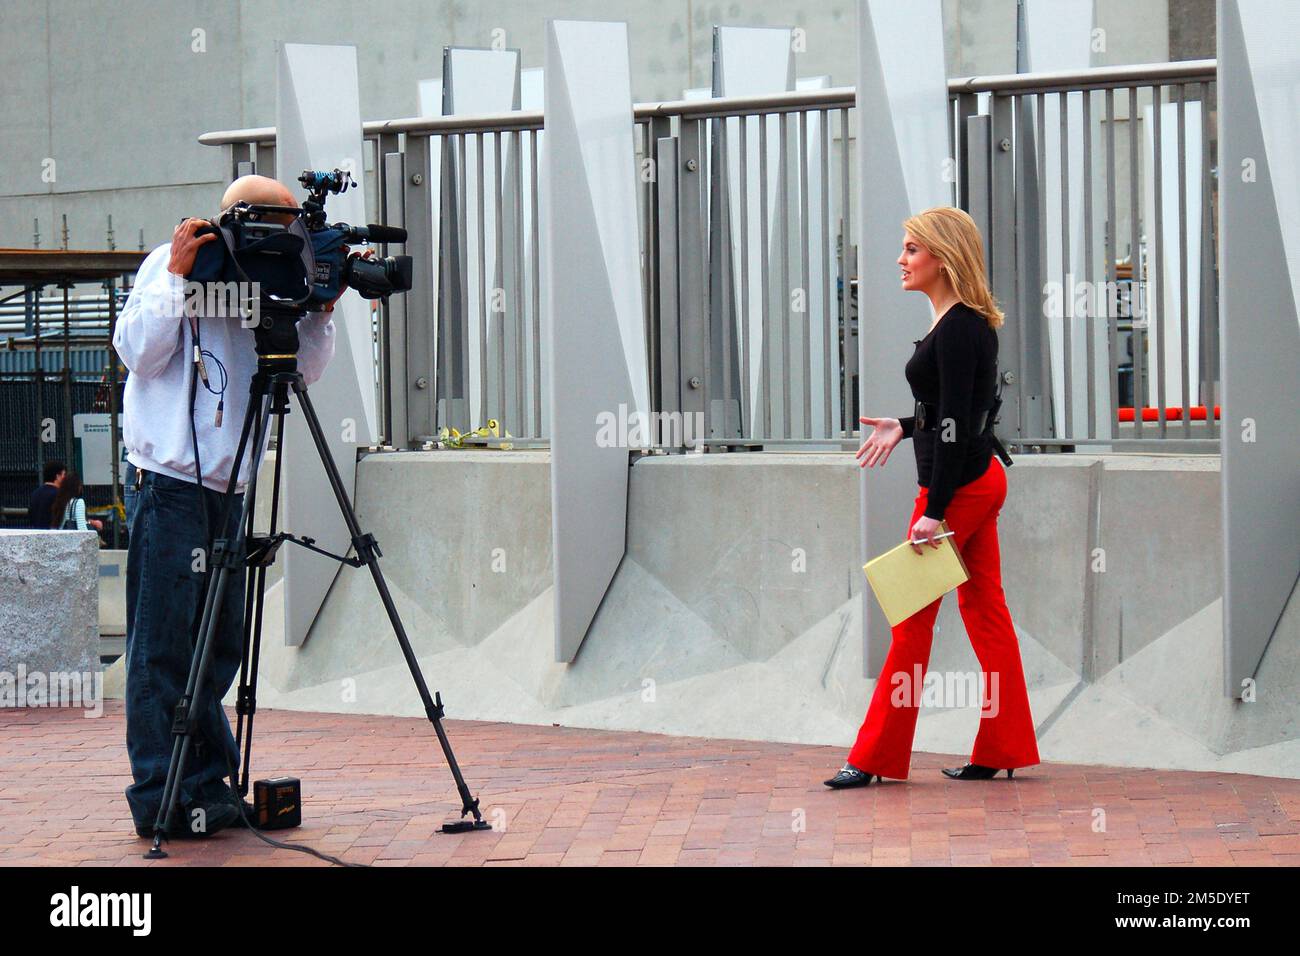 A newswoman reports live on camera as part of the broadcast media Stock Photo